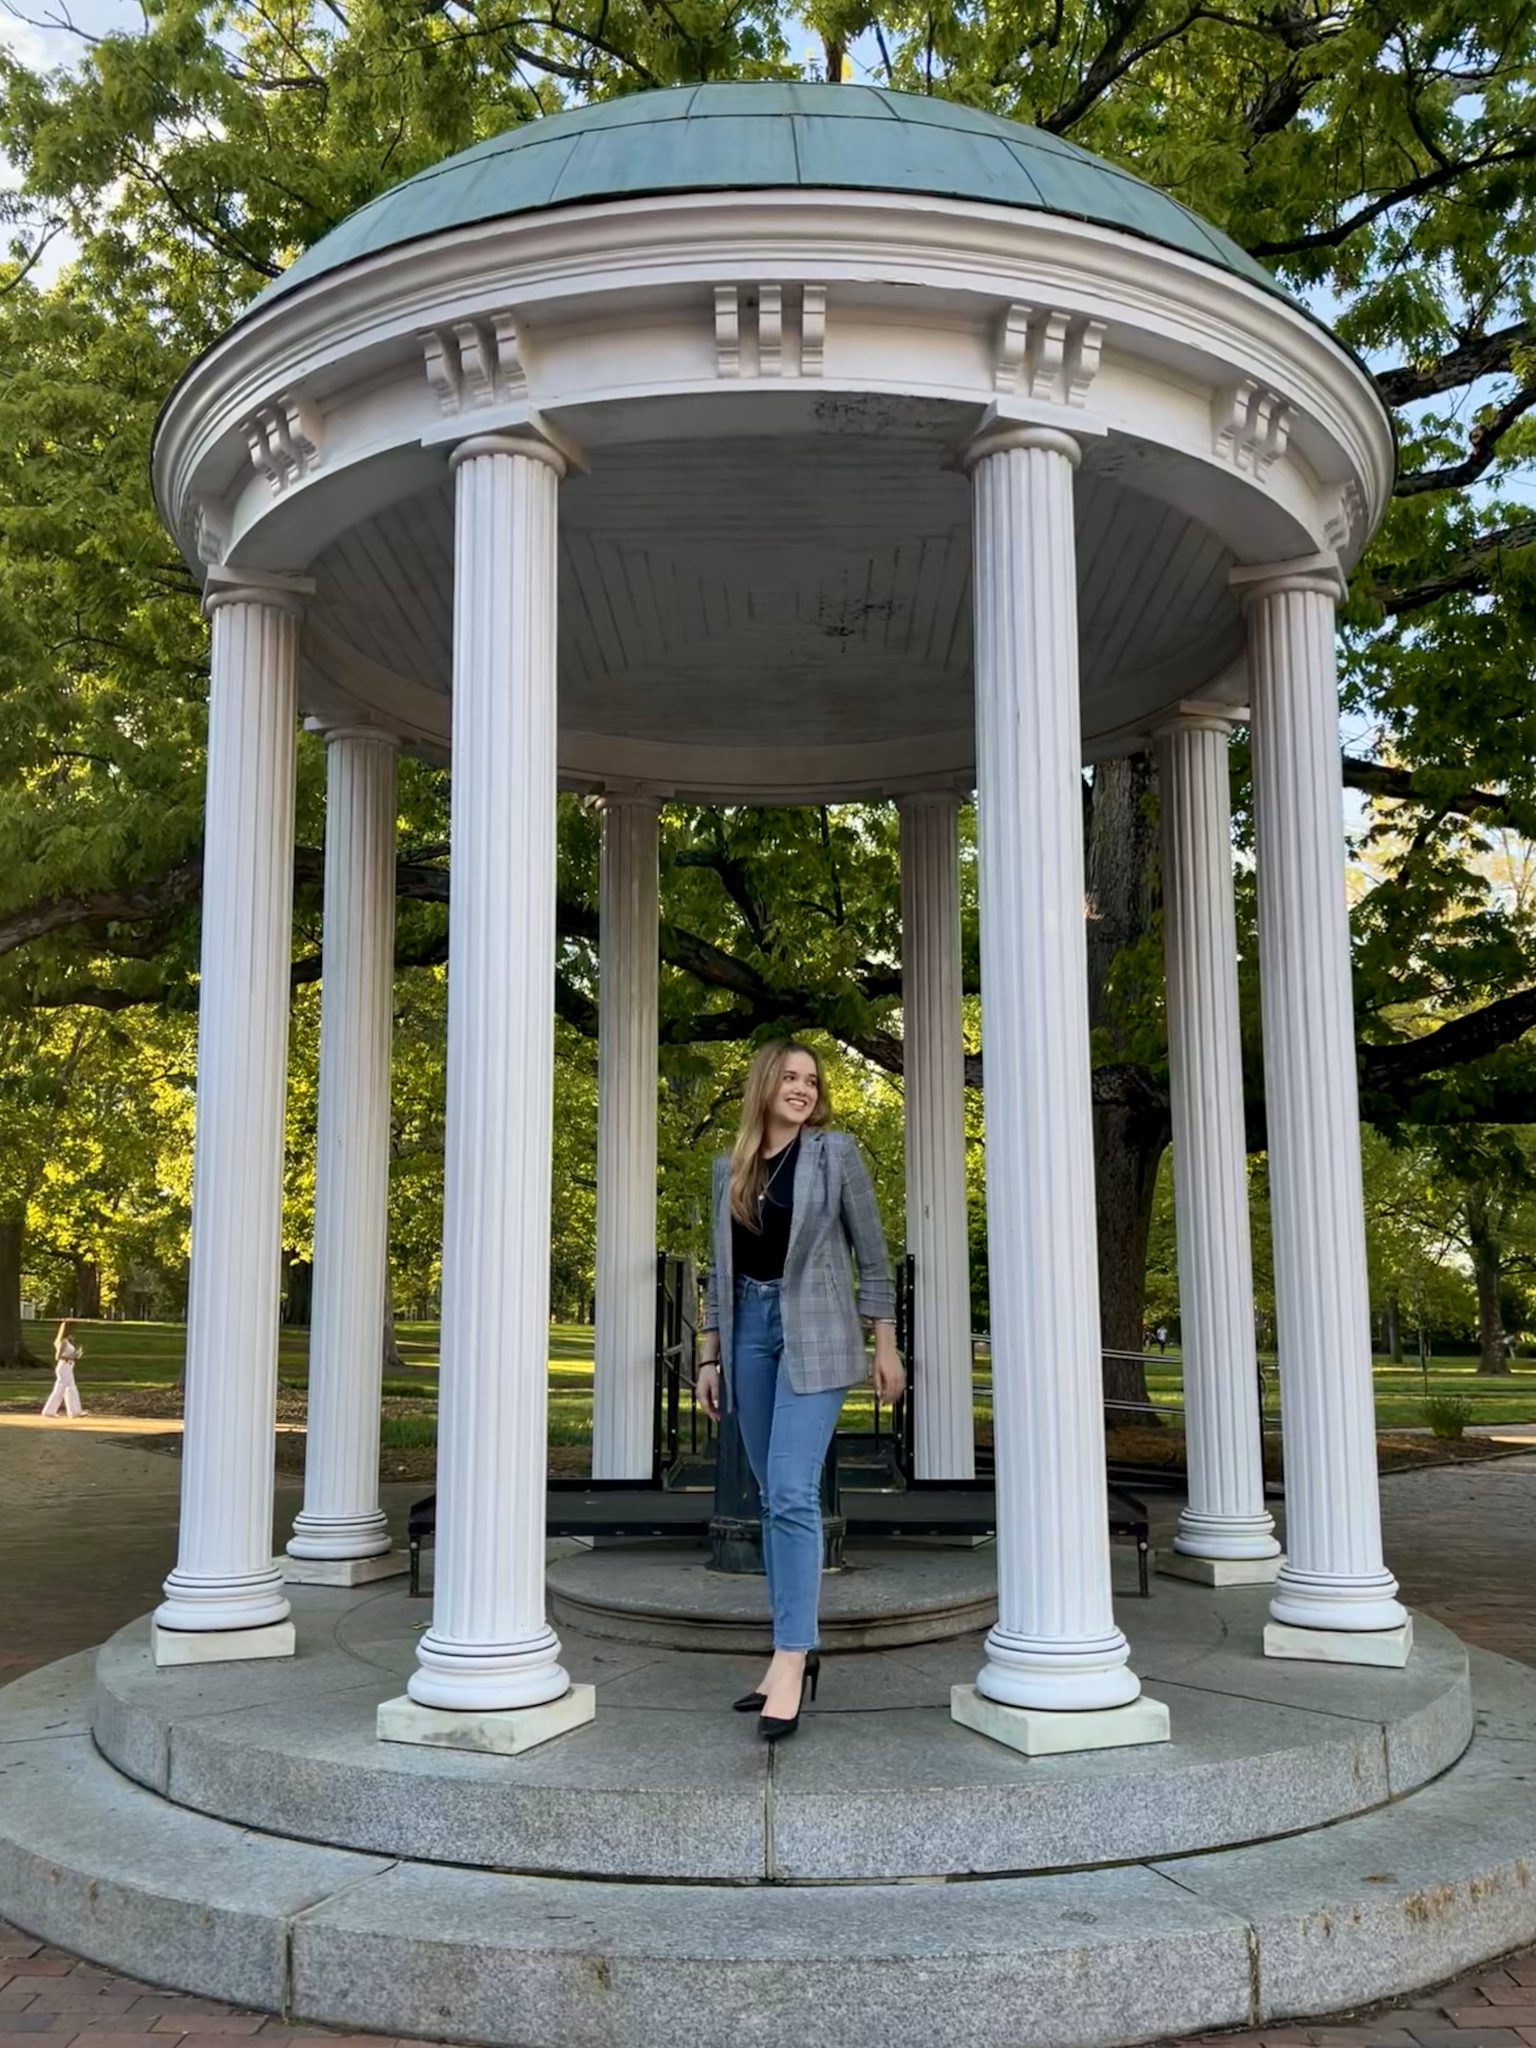 Picture of young women in light jeans, black tucked in shirt and a checkered gray blazer. She is leaning on her back leg with her face toward the side. She is in a gazebo with columns around her out in a park setting. 